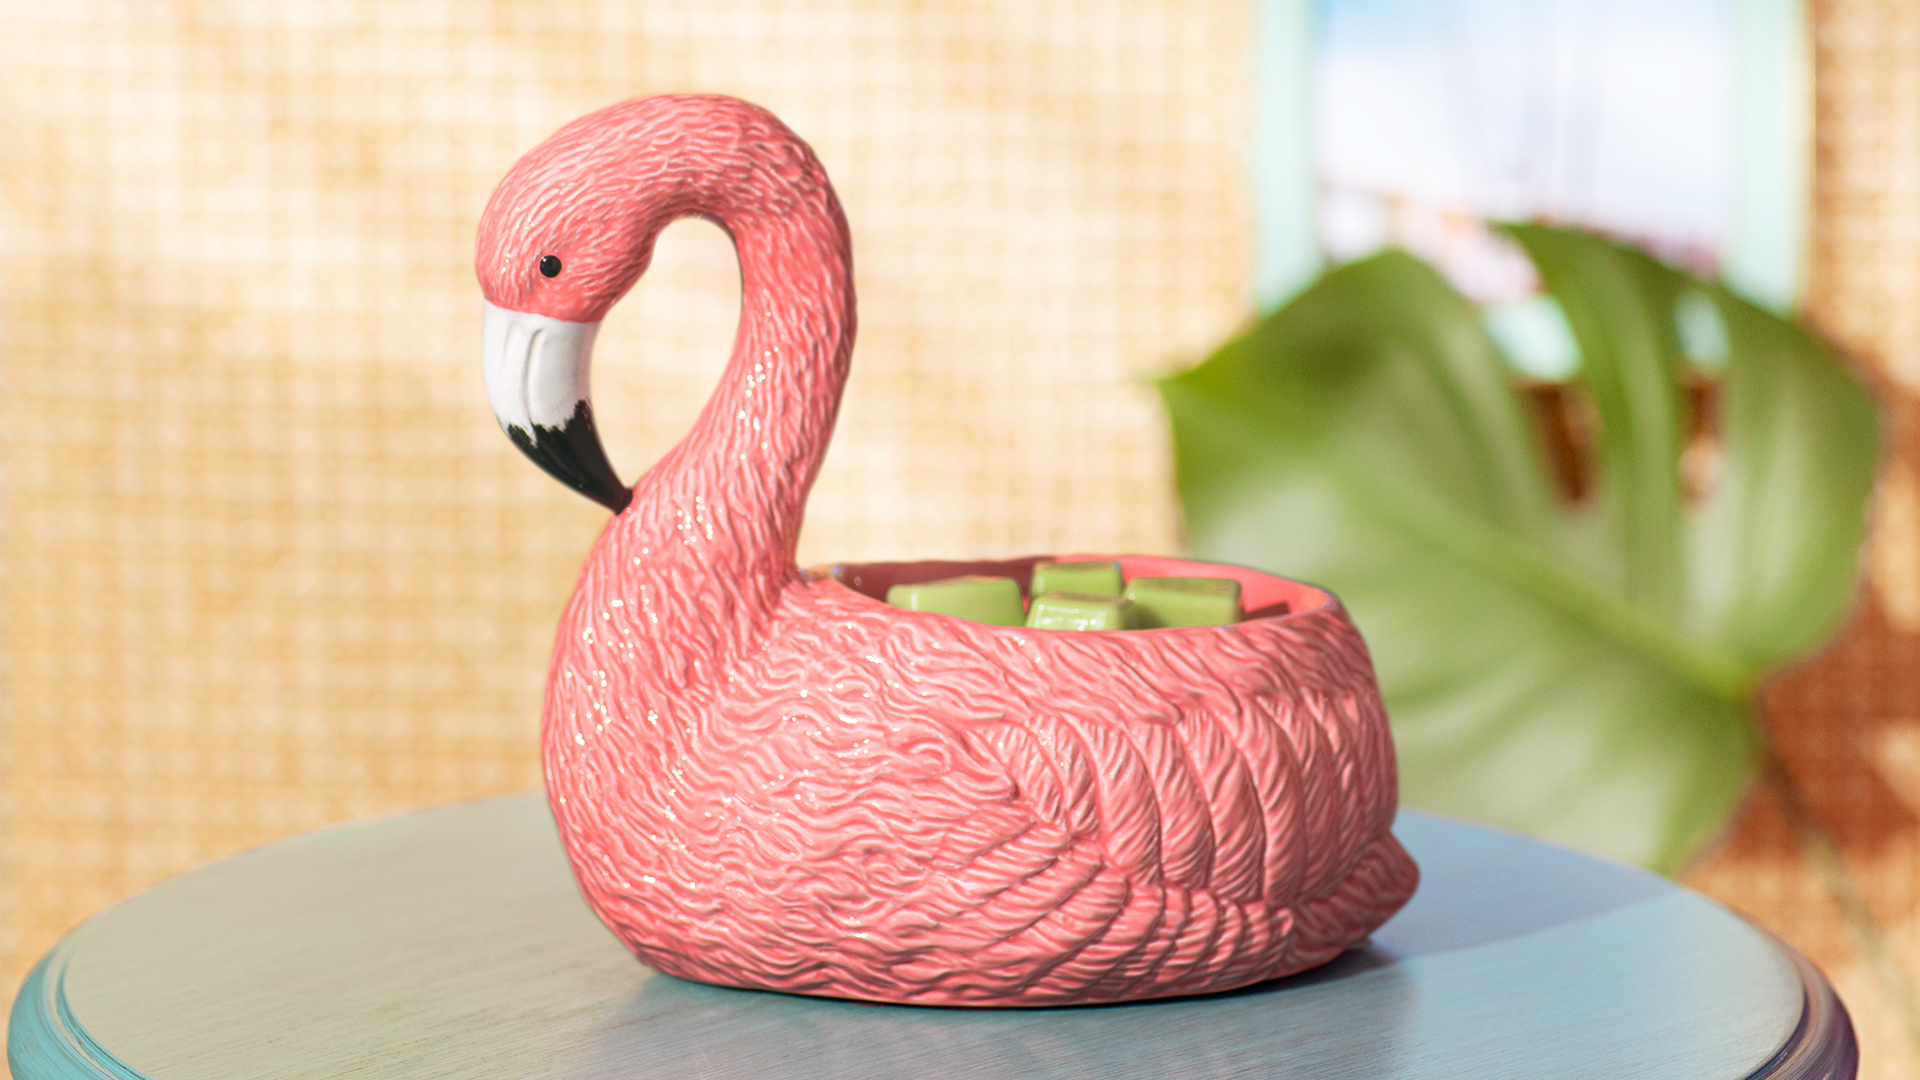 Scentsy’s new Pink Flamingo Warmer! It is a bold pink warmer that is melting green wax cubes while sitting on a small blue side table beside a big green monstera leaf